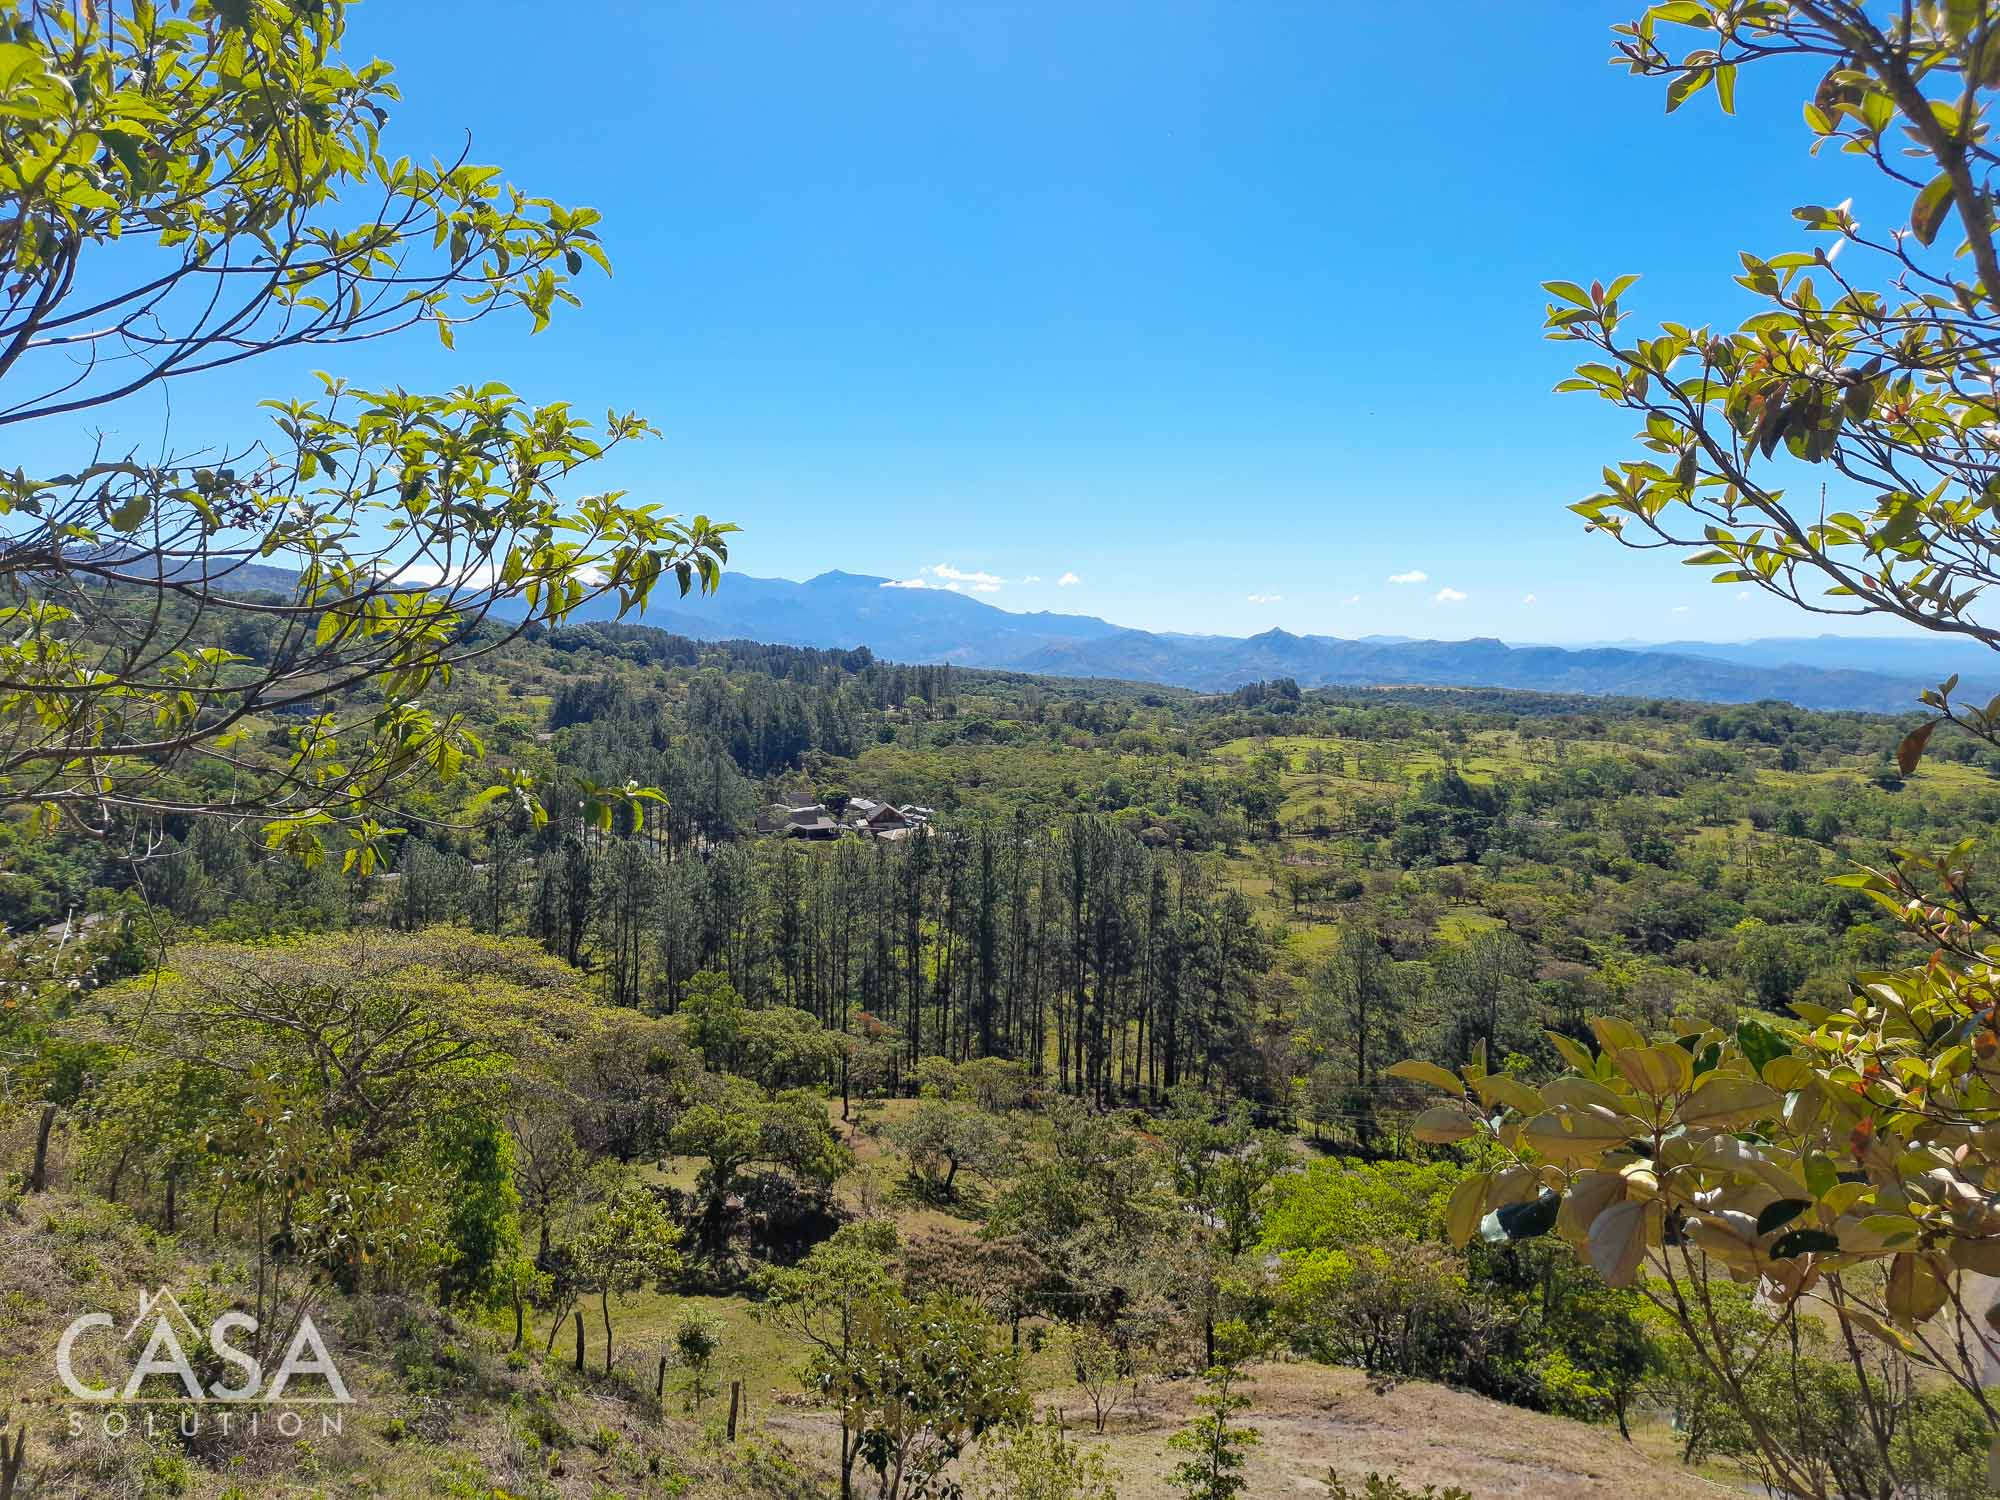 Discover panoramic mountain views in Boquete with this home site lot for sale in Jaramillo, Boquete